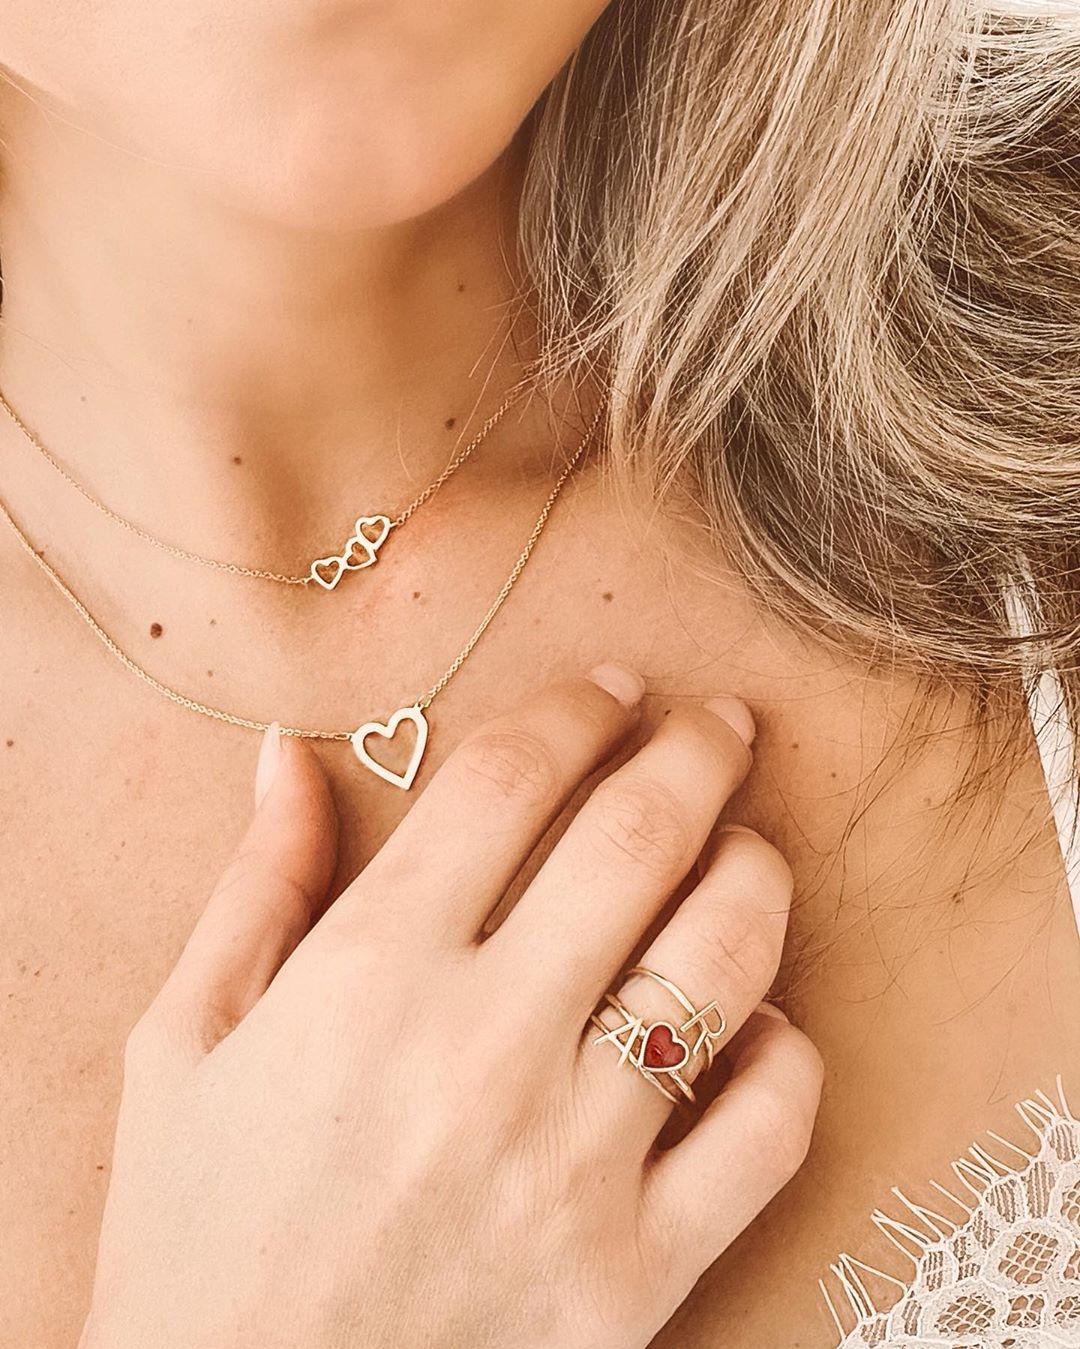 The best and easiest way to choose jewelry for the summer season